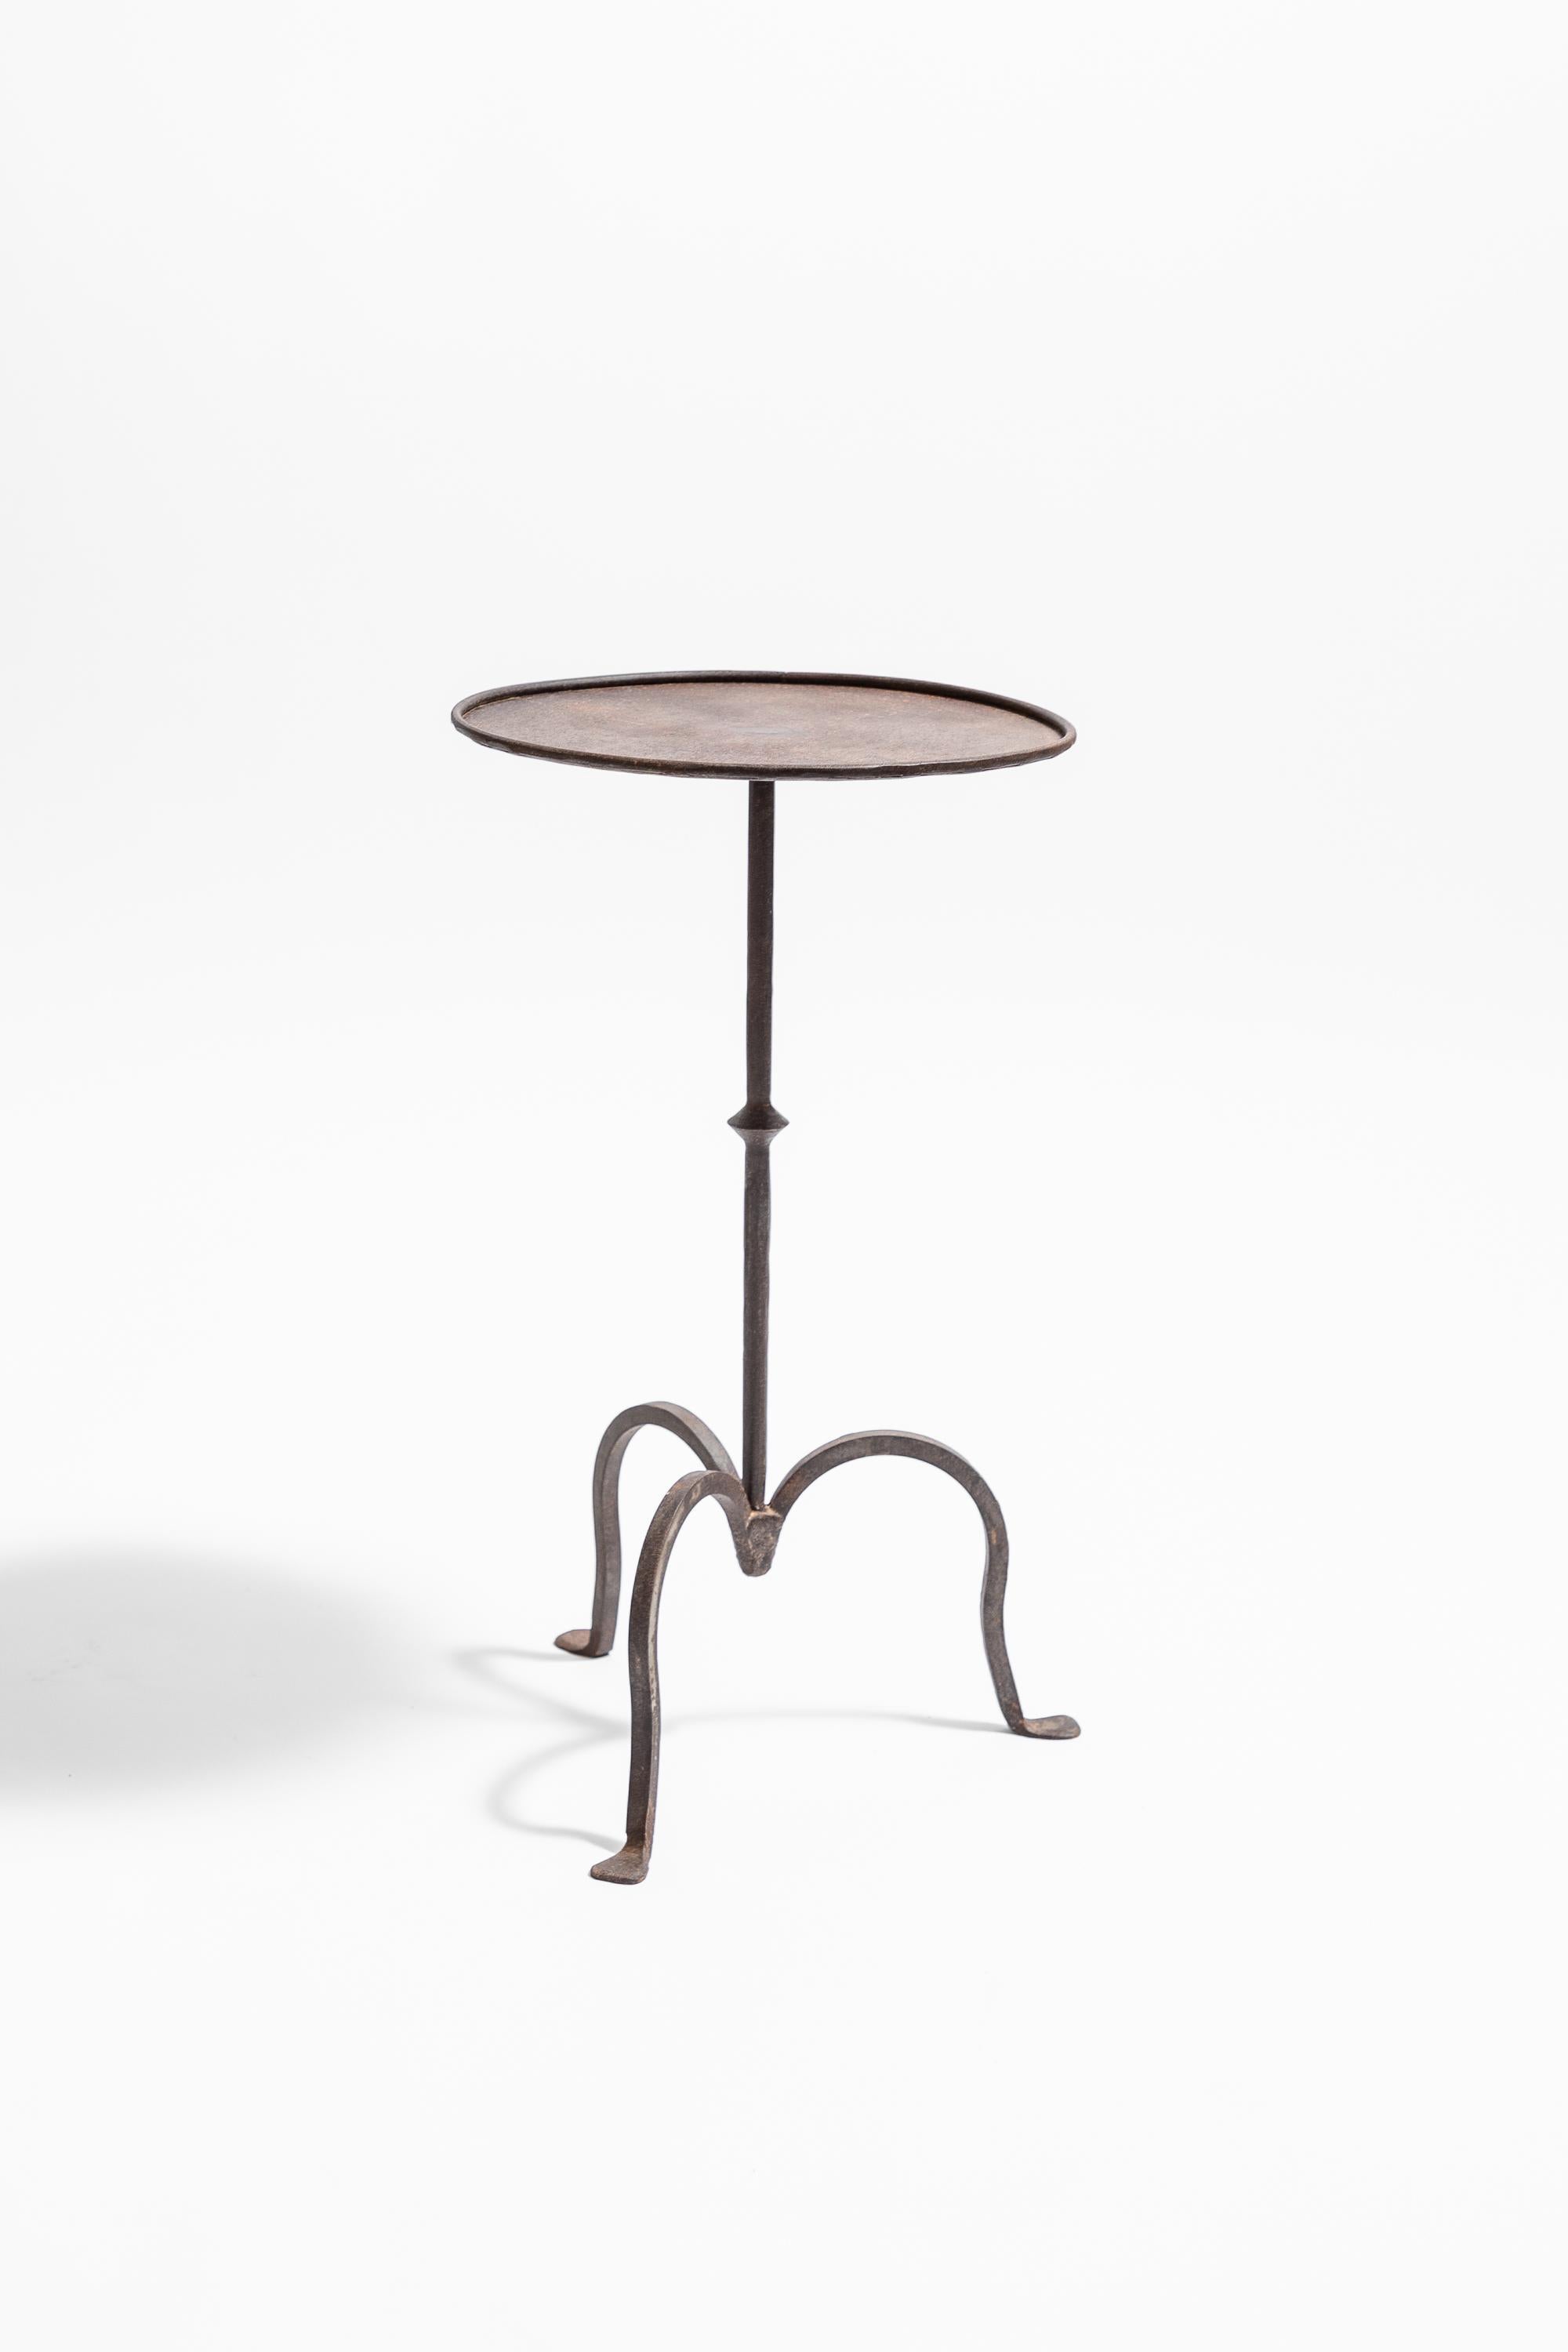 A wrought iron martini table, hand made in England to a 1940s original design. 

Shown here finished with a natural bronze patina. Available in bronze or black finishes.

Large: 31 cm diameter top, 56 high 

From stock or made to order on a c. 4